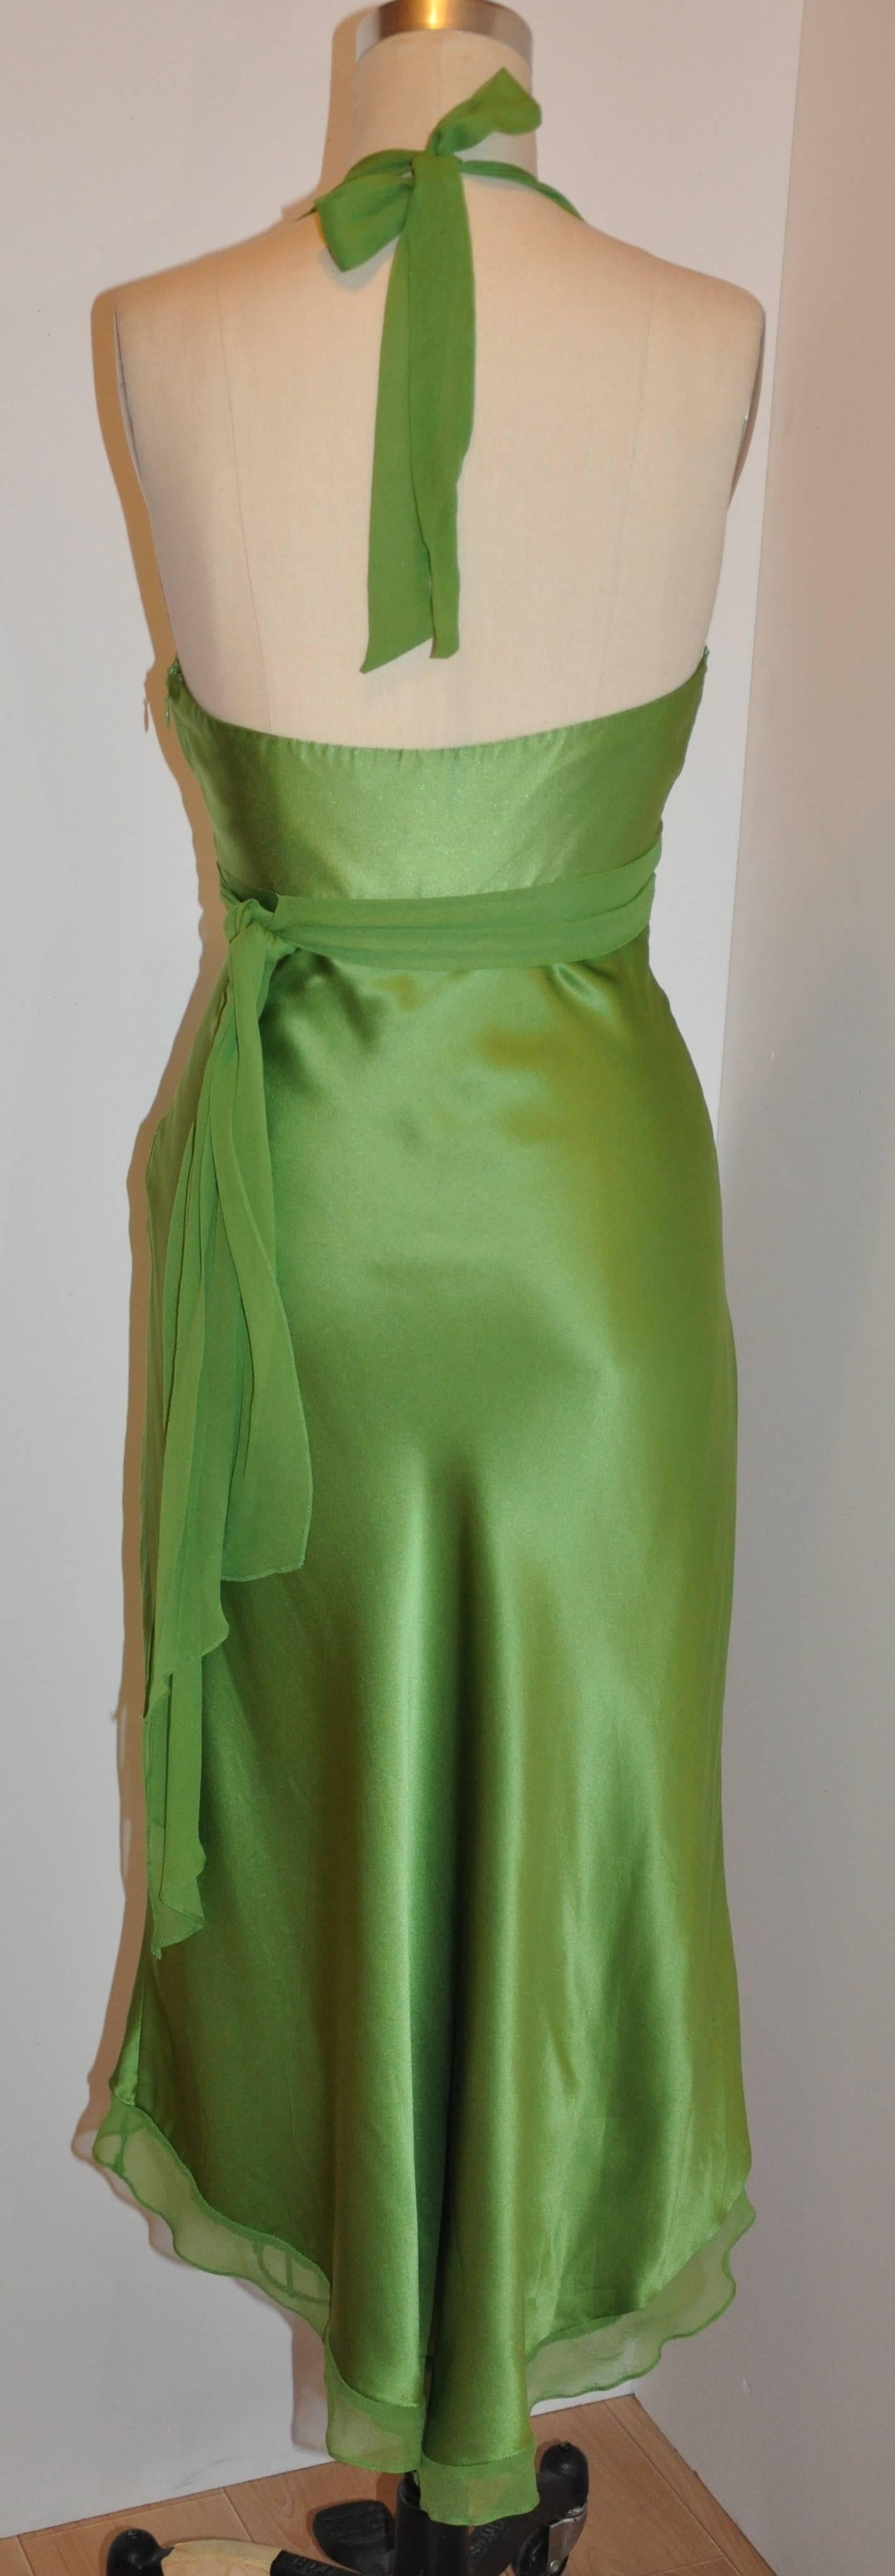        This wonderful elegant Irish-green silk crepe di chine optional halter tie strapless cocktail evening dress is accented with silk chiffon. Cut on the bias, this lovely dress body hugs where needed and yet elegant in movement. There is an